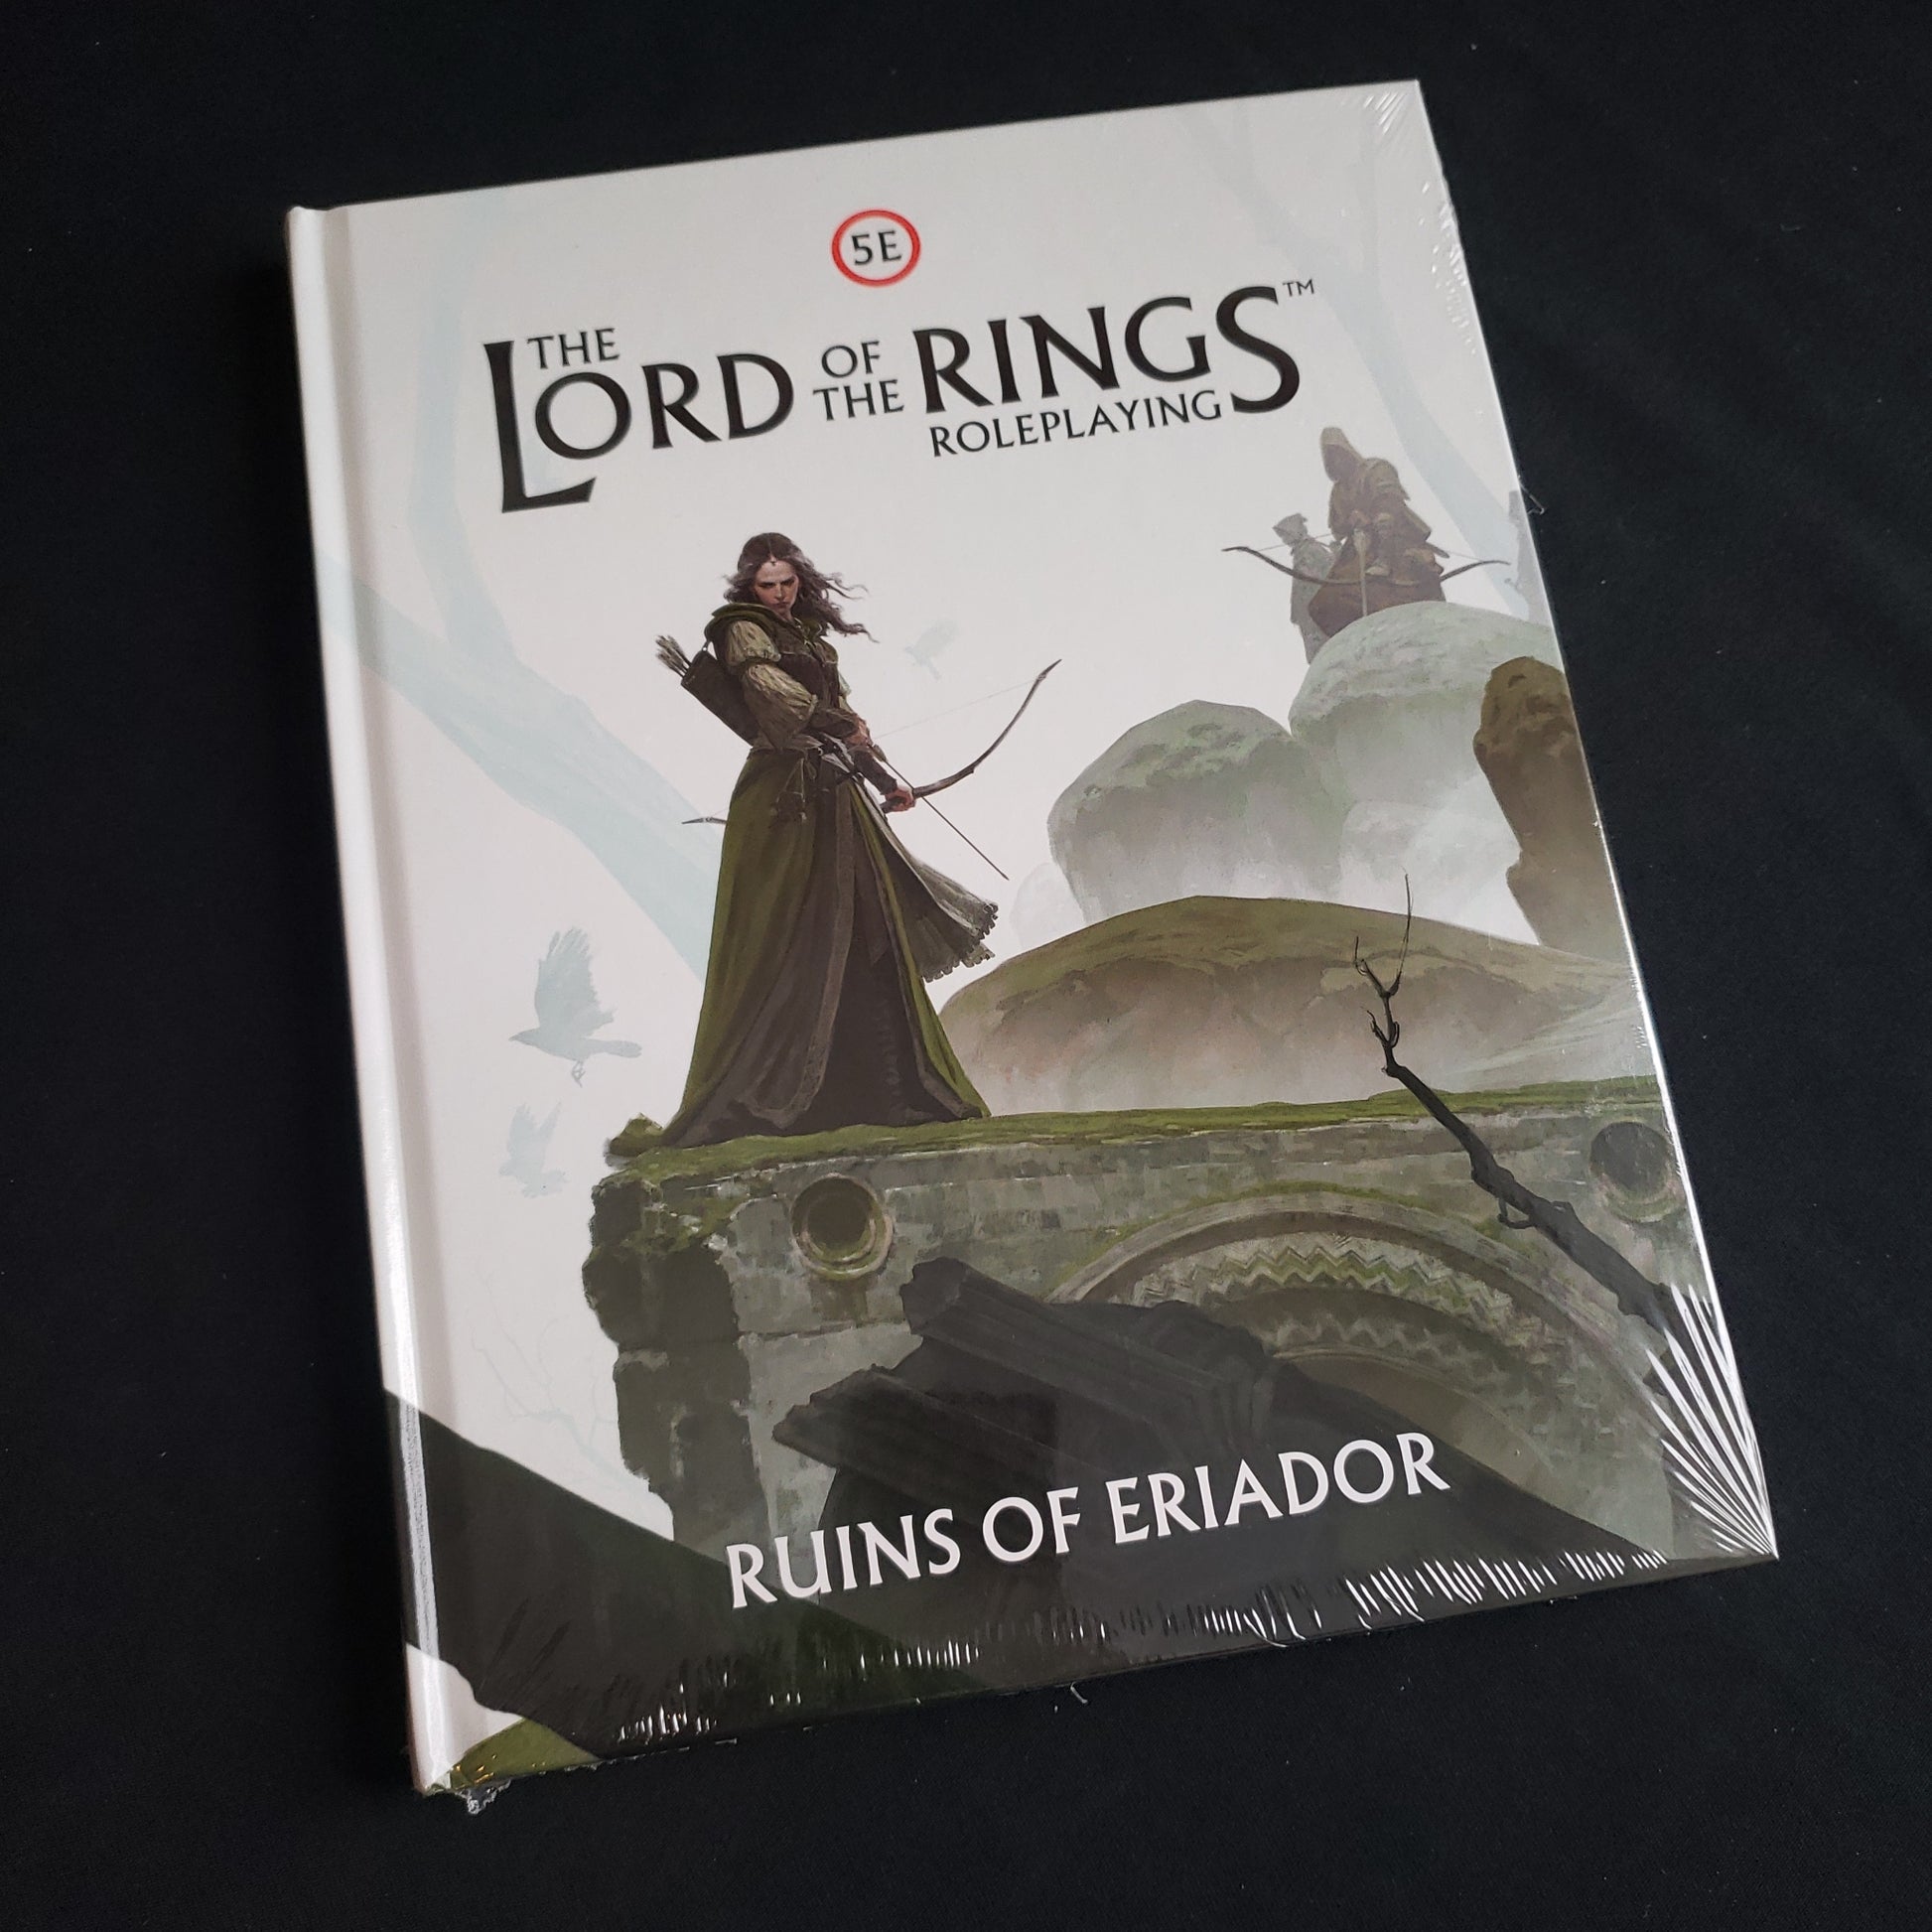 Image shows the front cover of the Ruins of Eriador book for the Lord of the Rings 5E roleplaying game